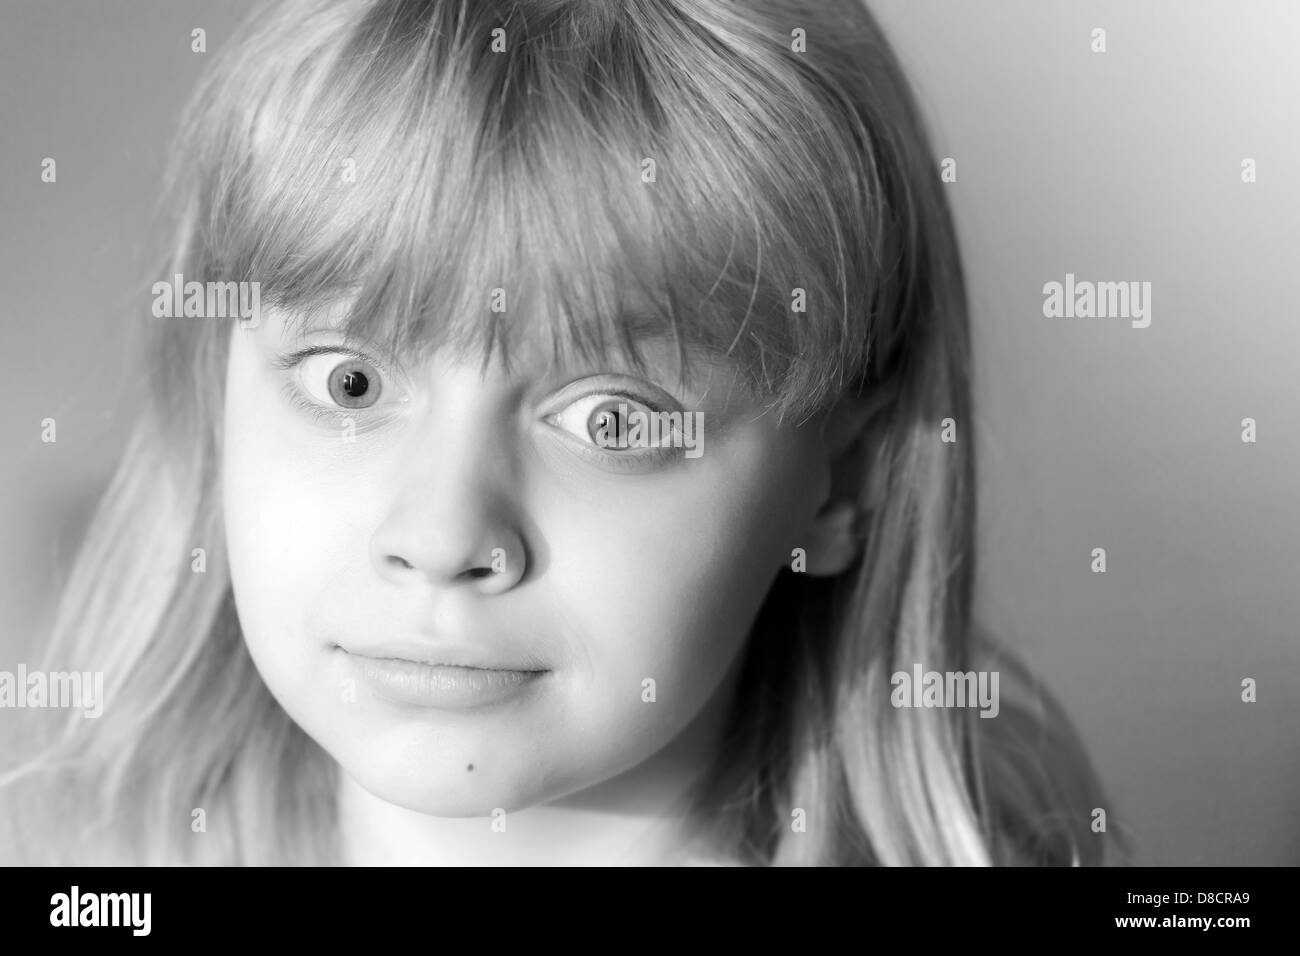 Monochrome portrait of confused little blond girl Stock Photo